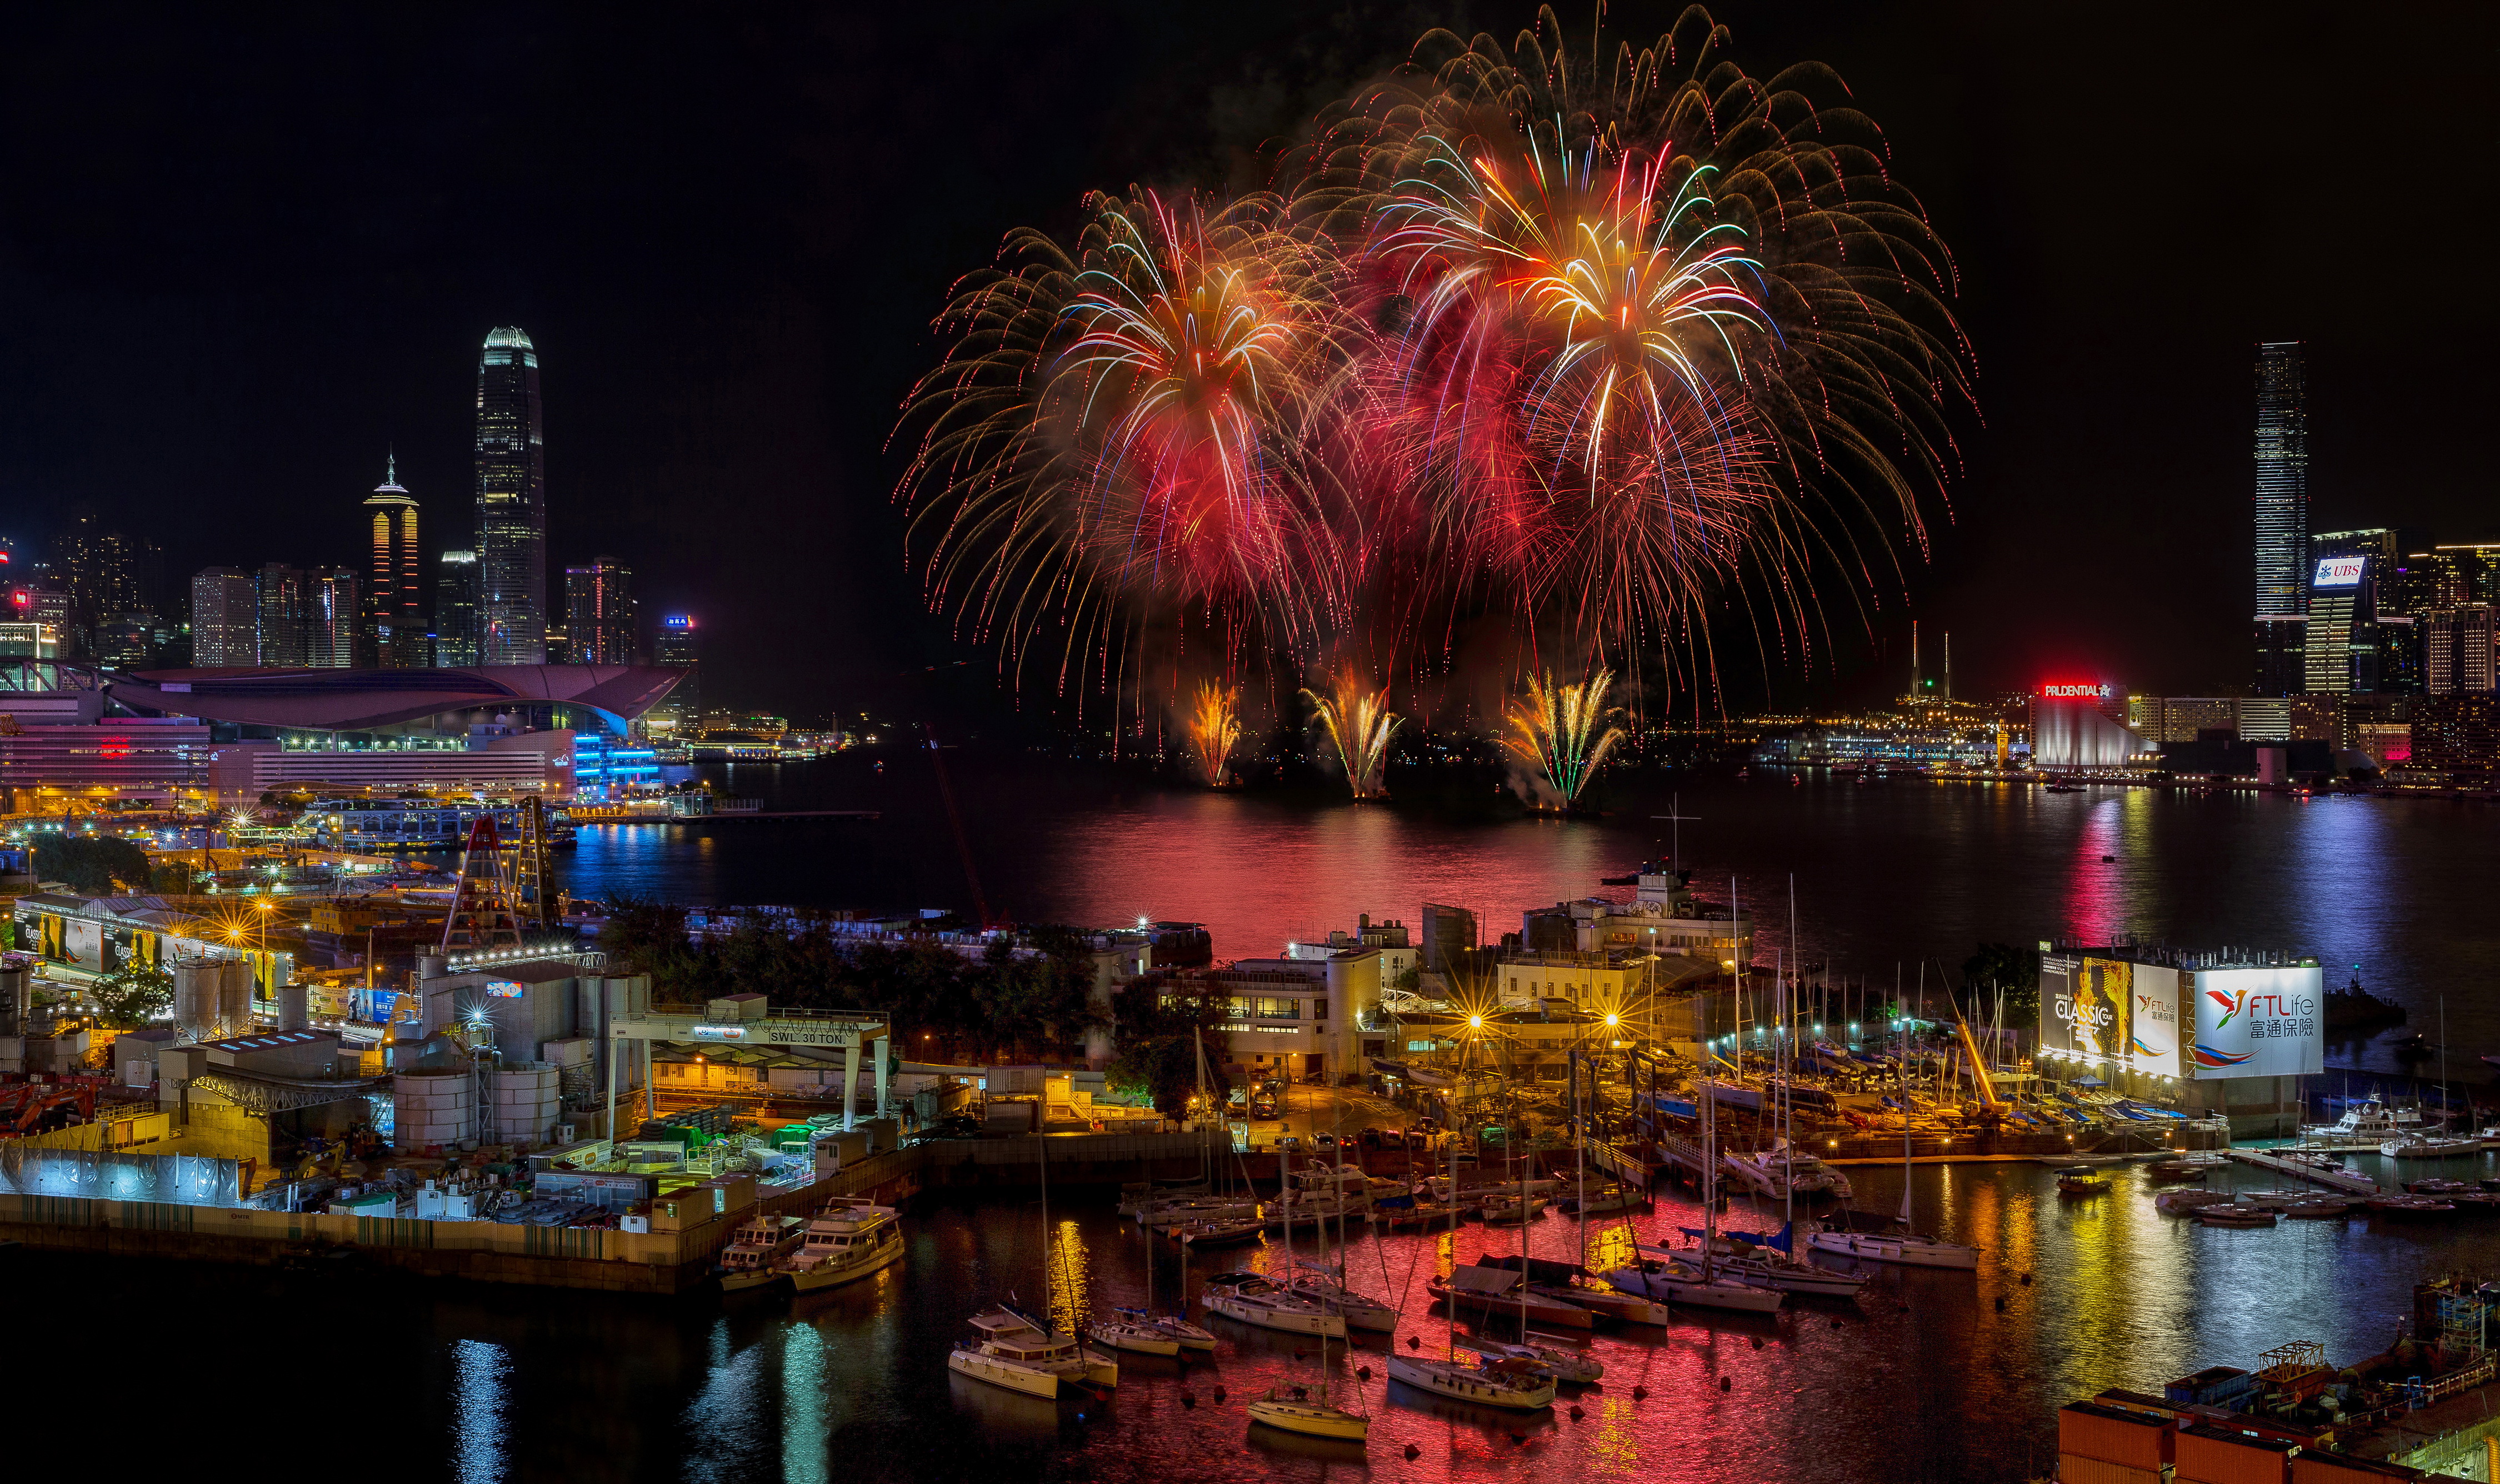 General 4500x2672 Hong Kong Victoria Harbour fireworks pier night yacht skyscraper China Asia colorful